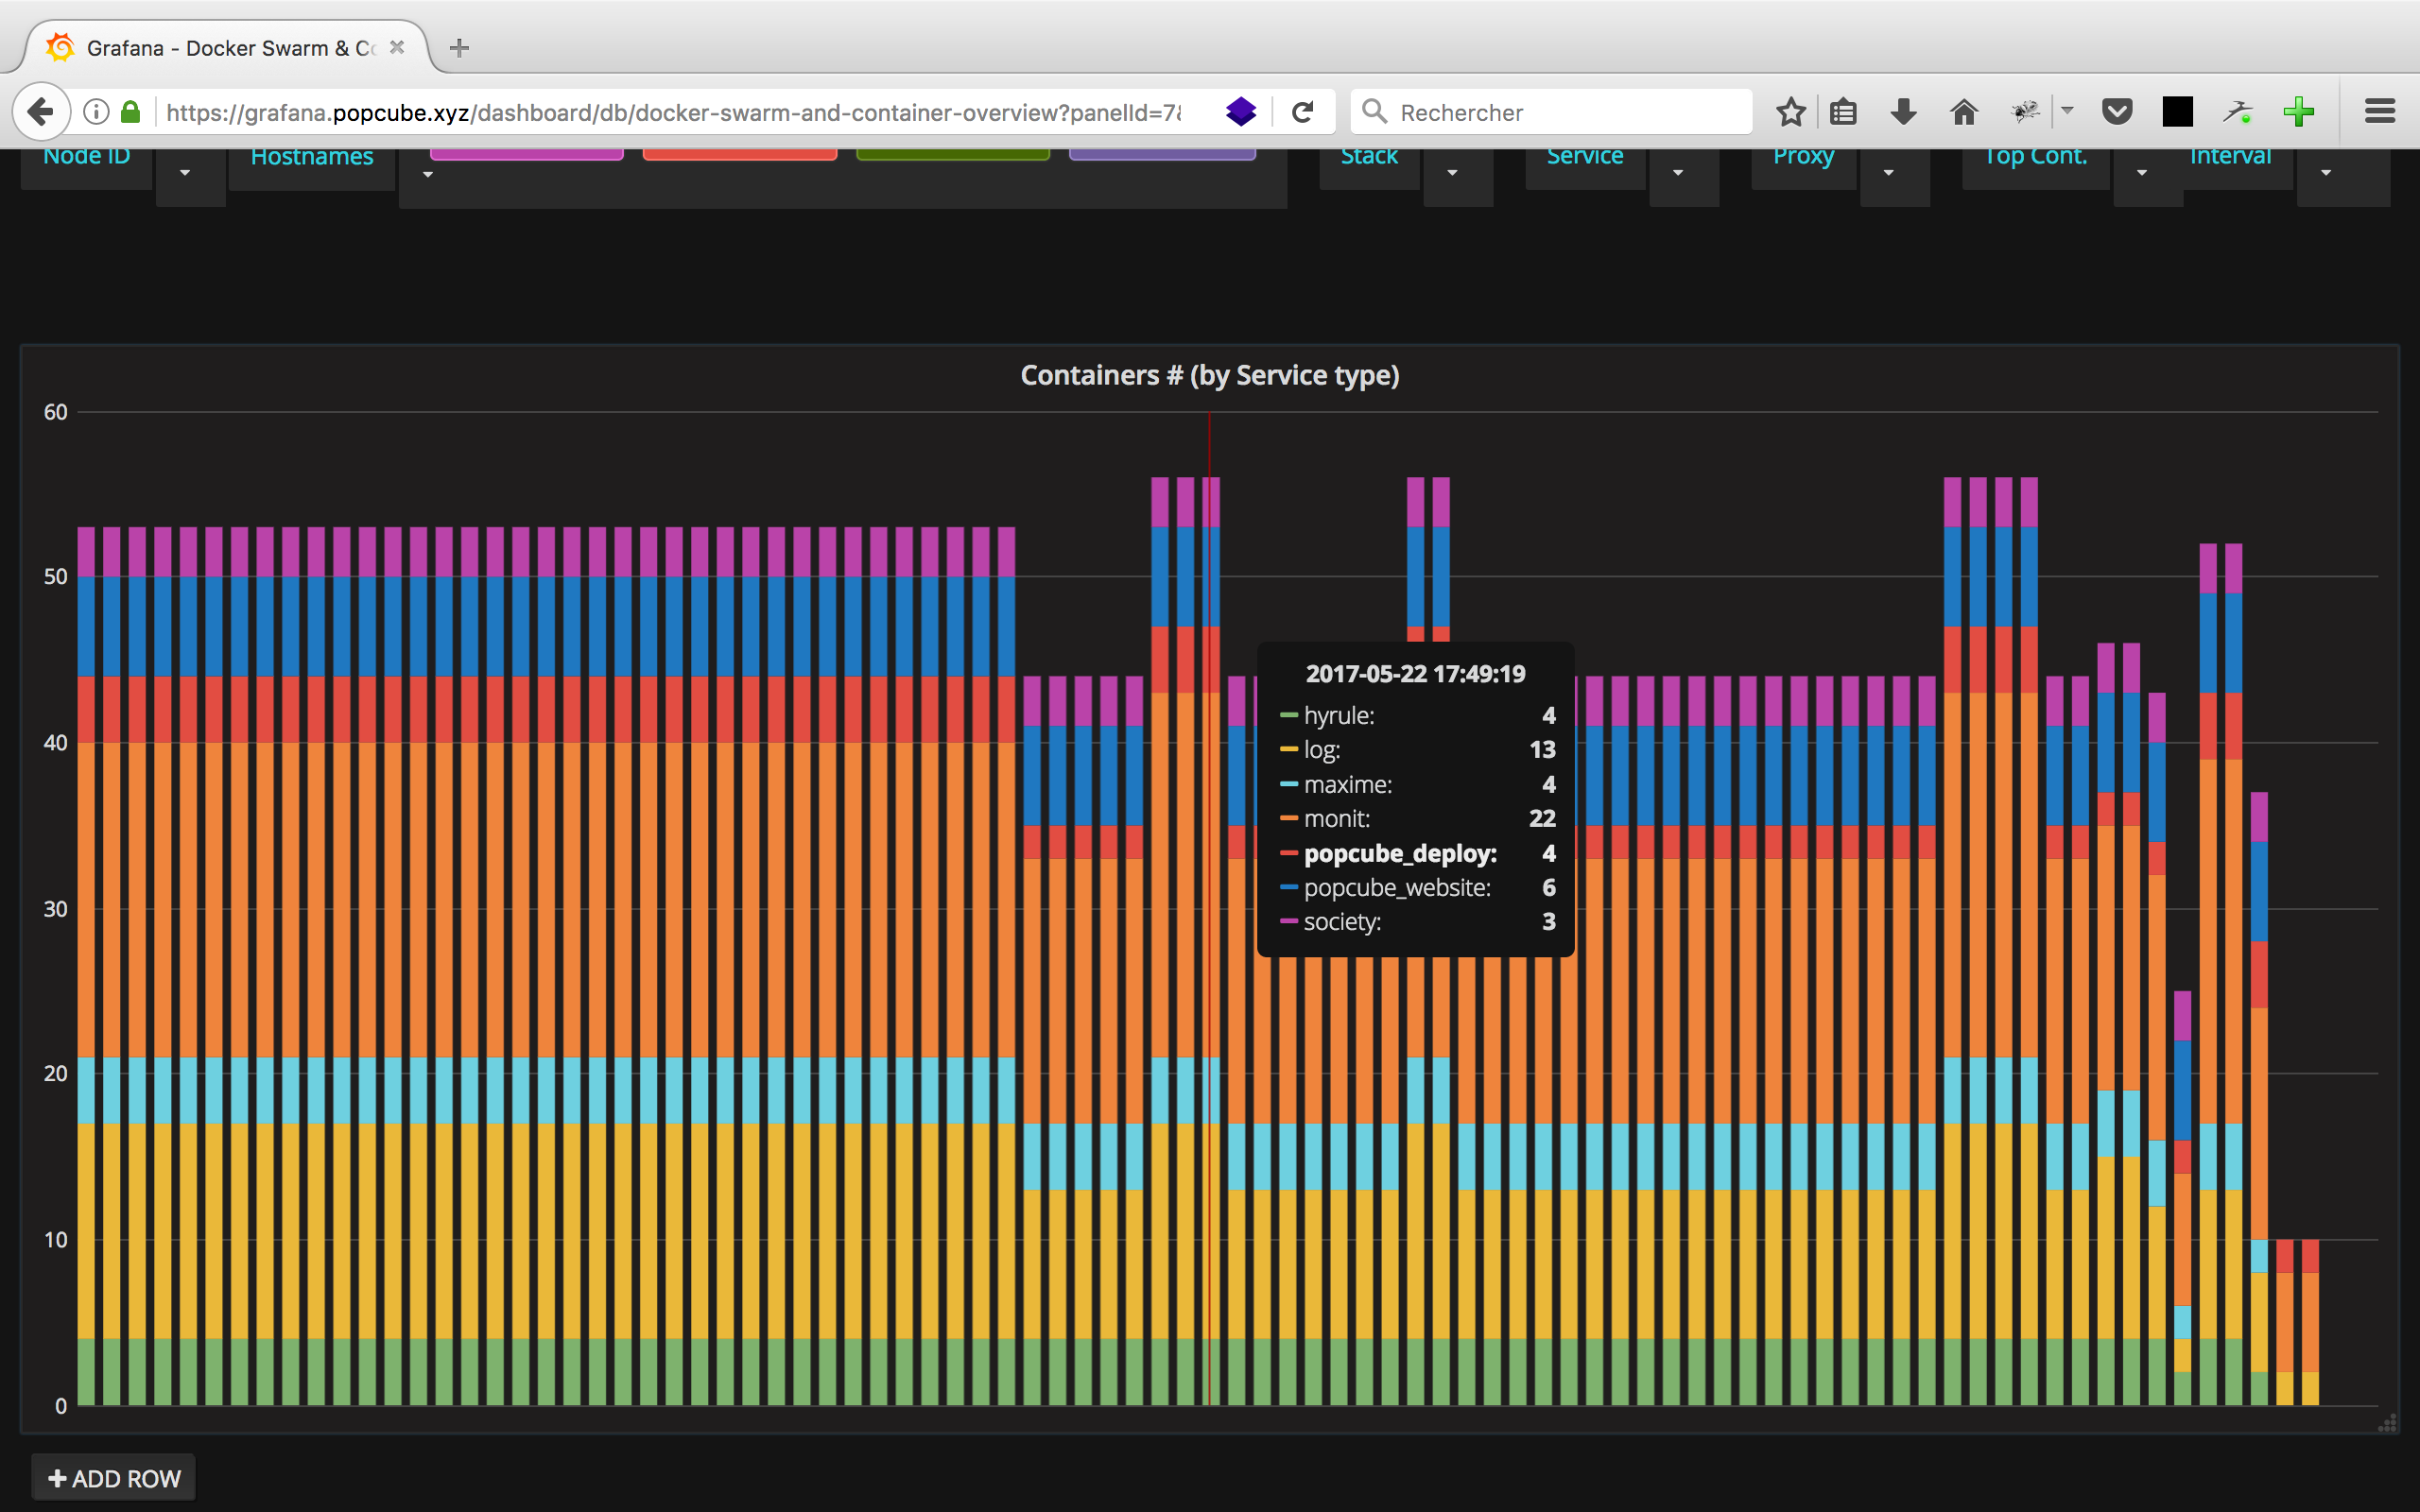 infrastructure/../../_static/infrastructure/monit/grafana_2.png